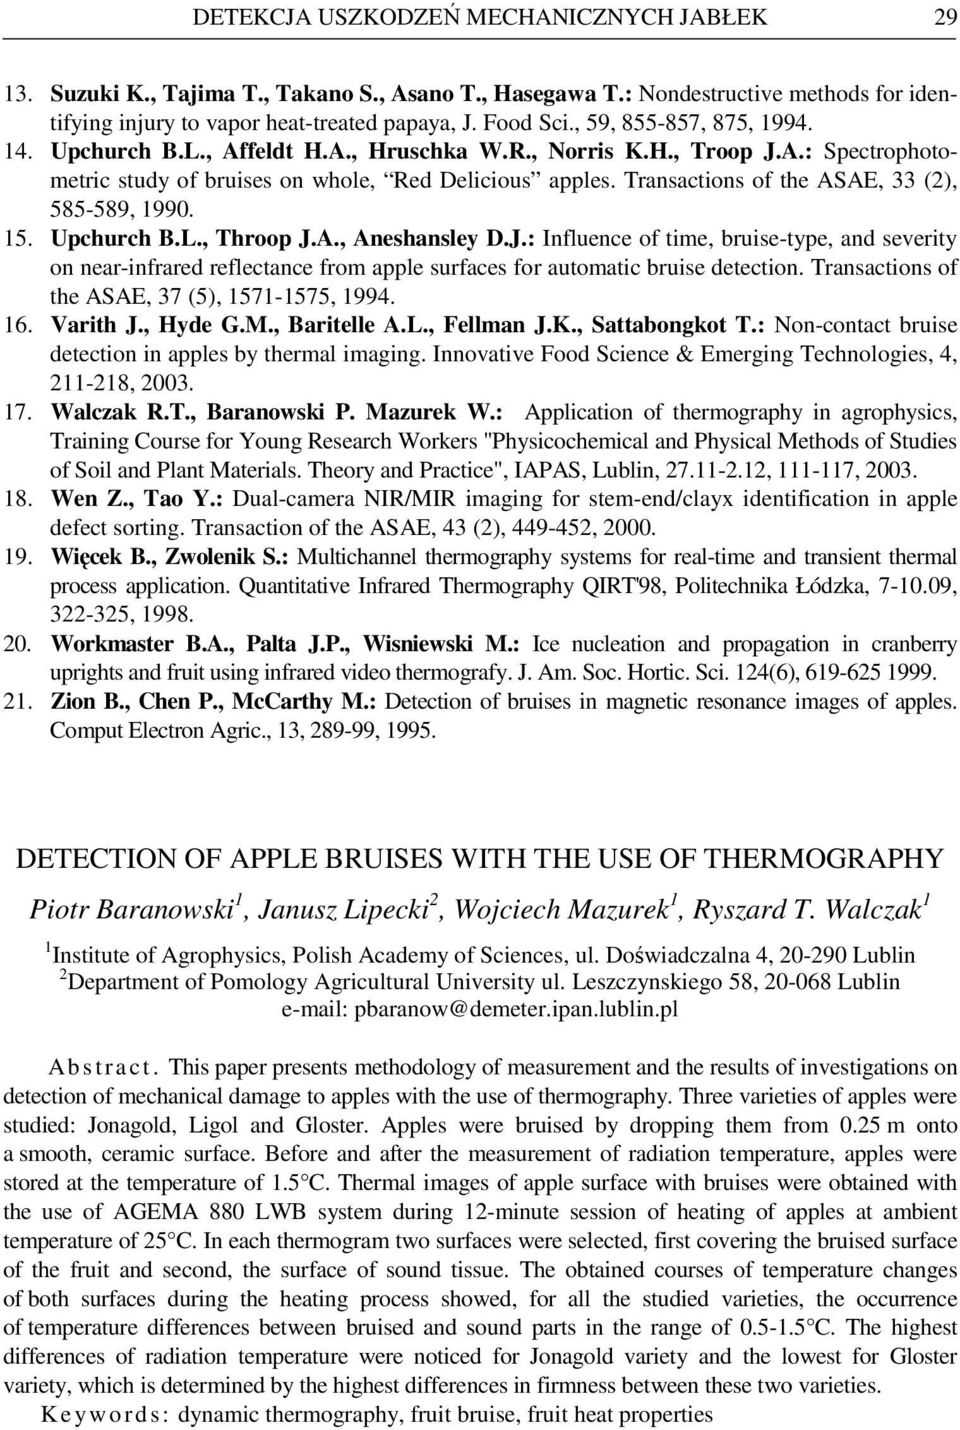 A., Aneshansley D.J.: Influence of time, bruise-type, and severity on near-infrared reflectance from apple surfaces for automatic bruise detection. Transactions of the ASAE, 3 (5), 5-55, 4. 6.